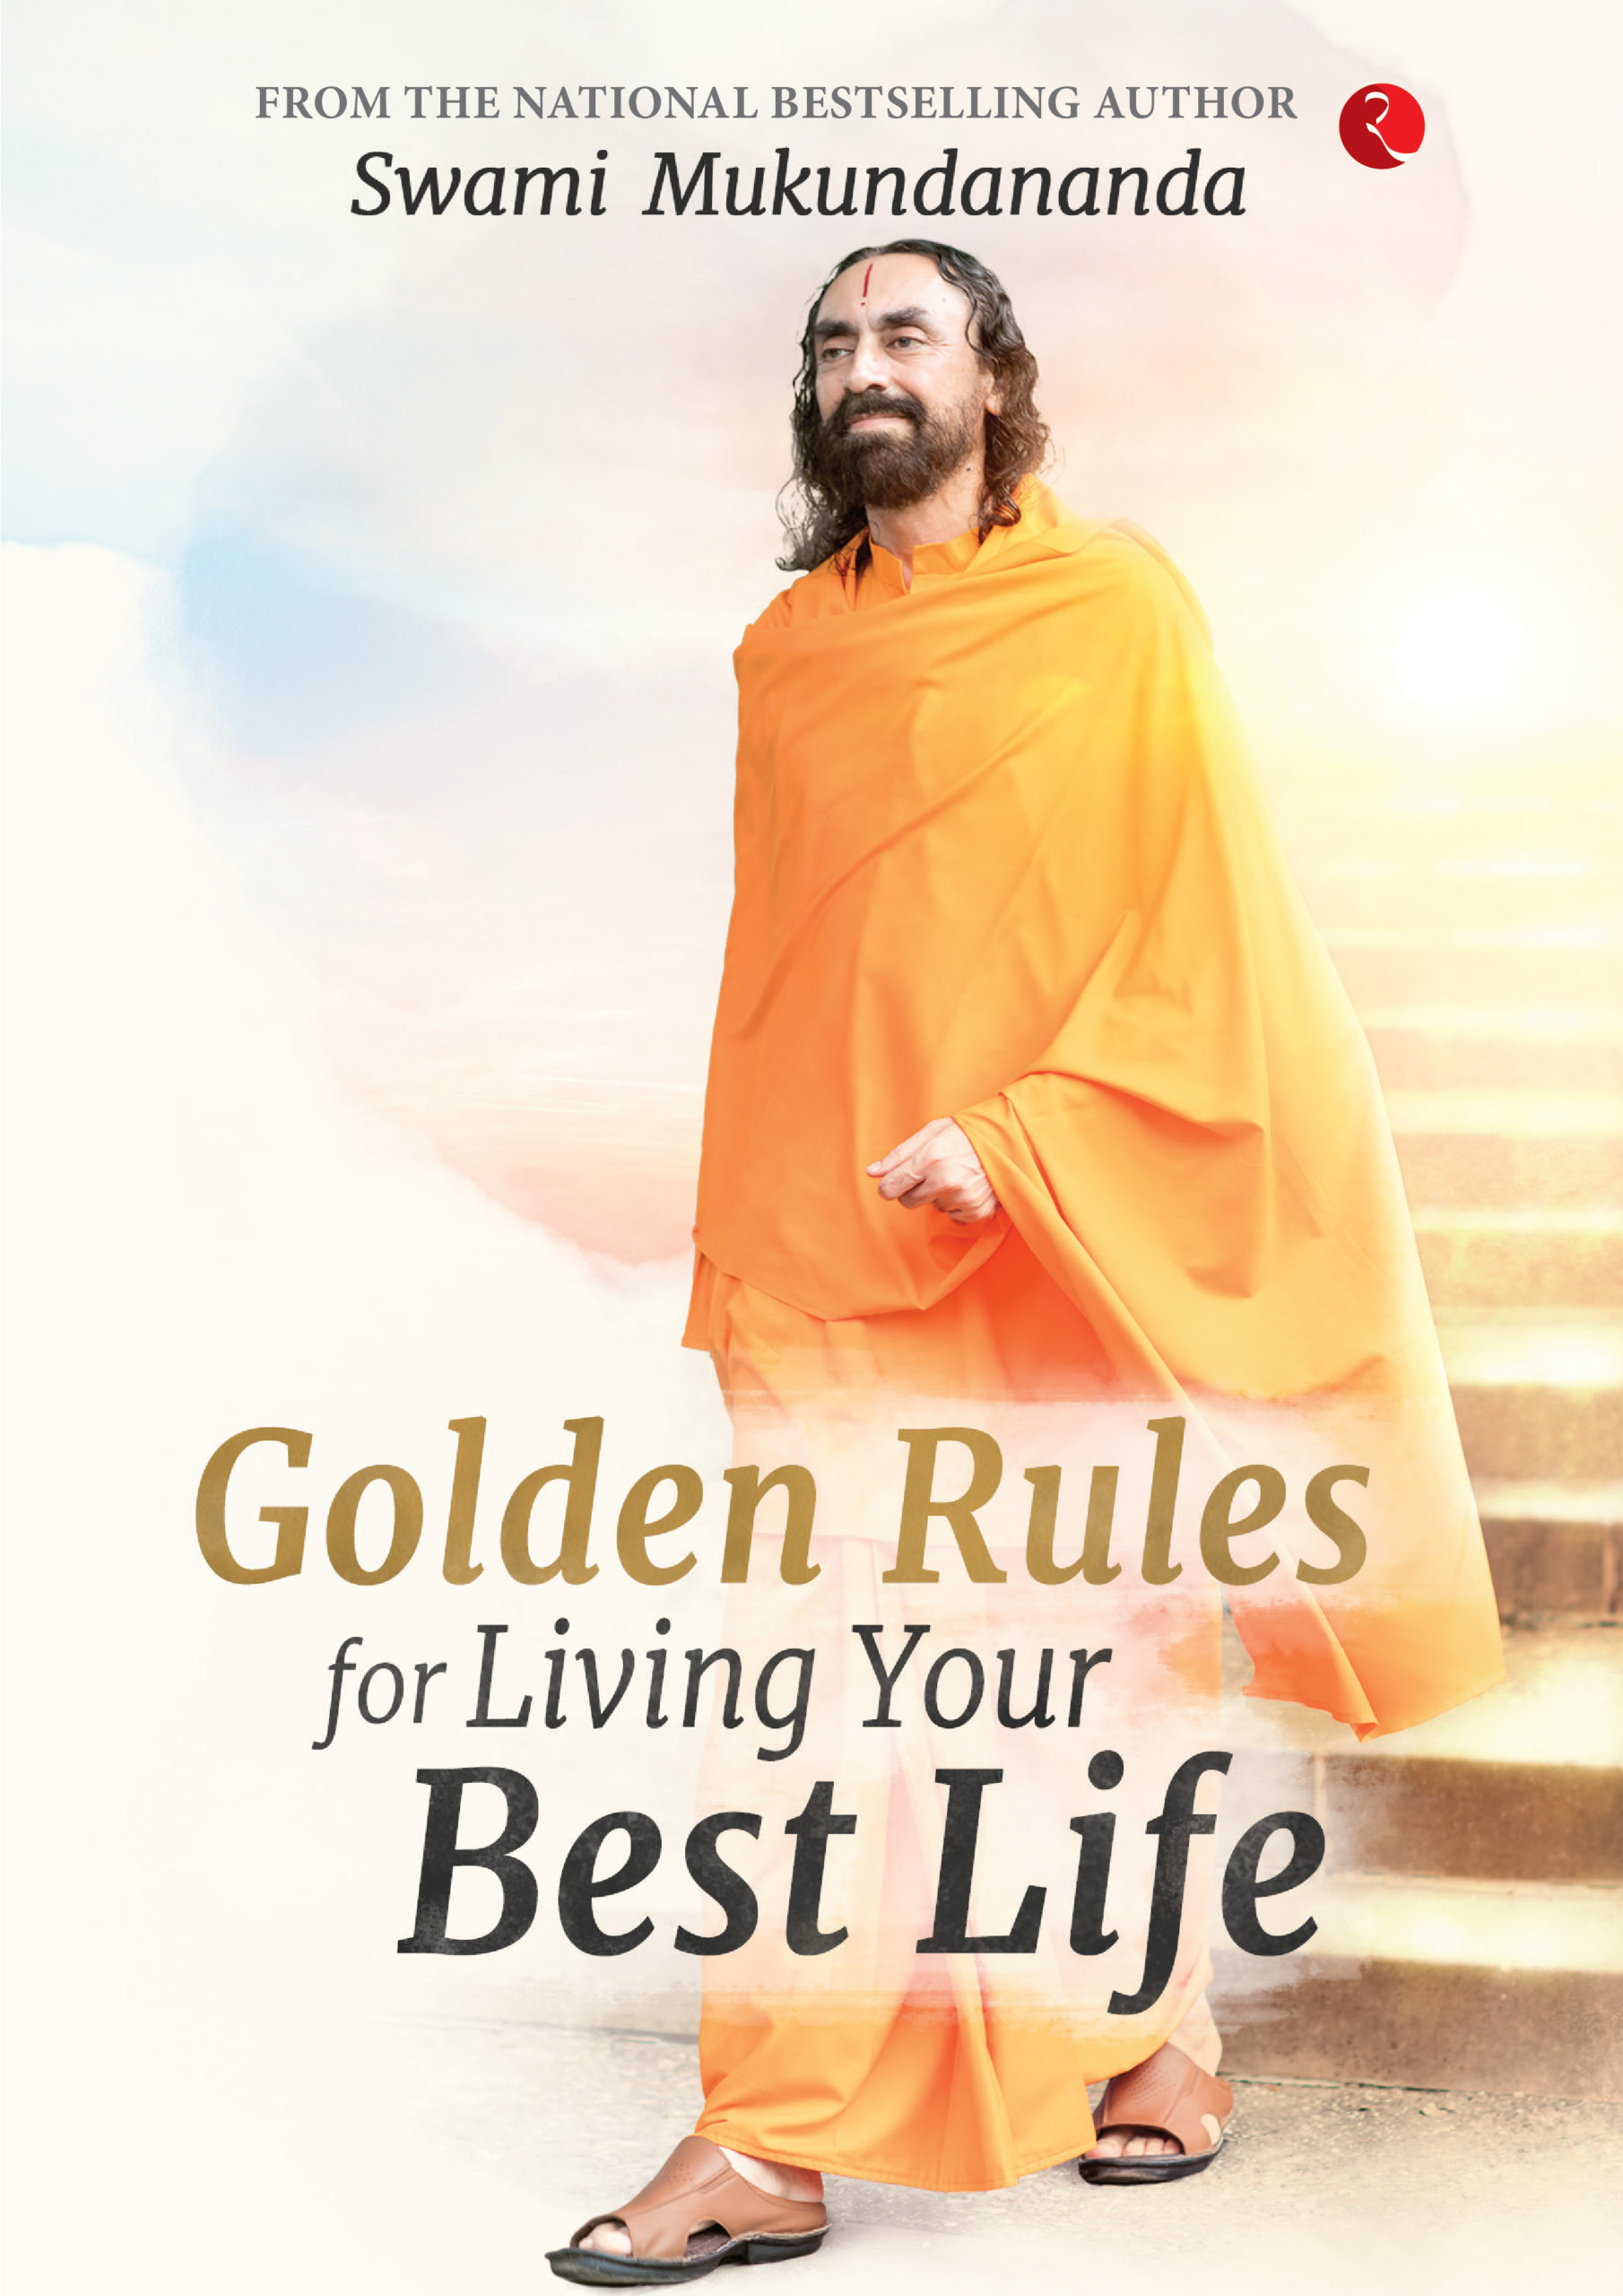 https://rupapublications.co.in/wp-content/uploads/2022/10/Golden-Rules-for-Living-Your-Best-Life-title-021-scaled.jpg